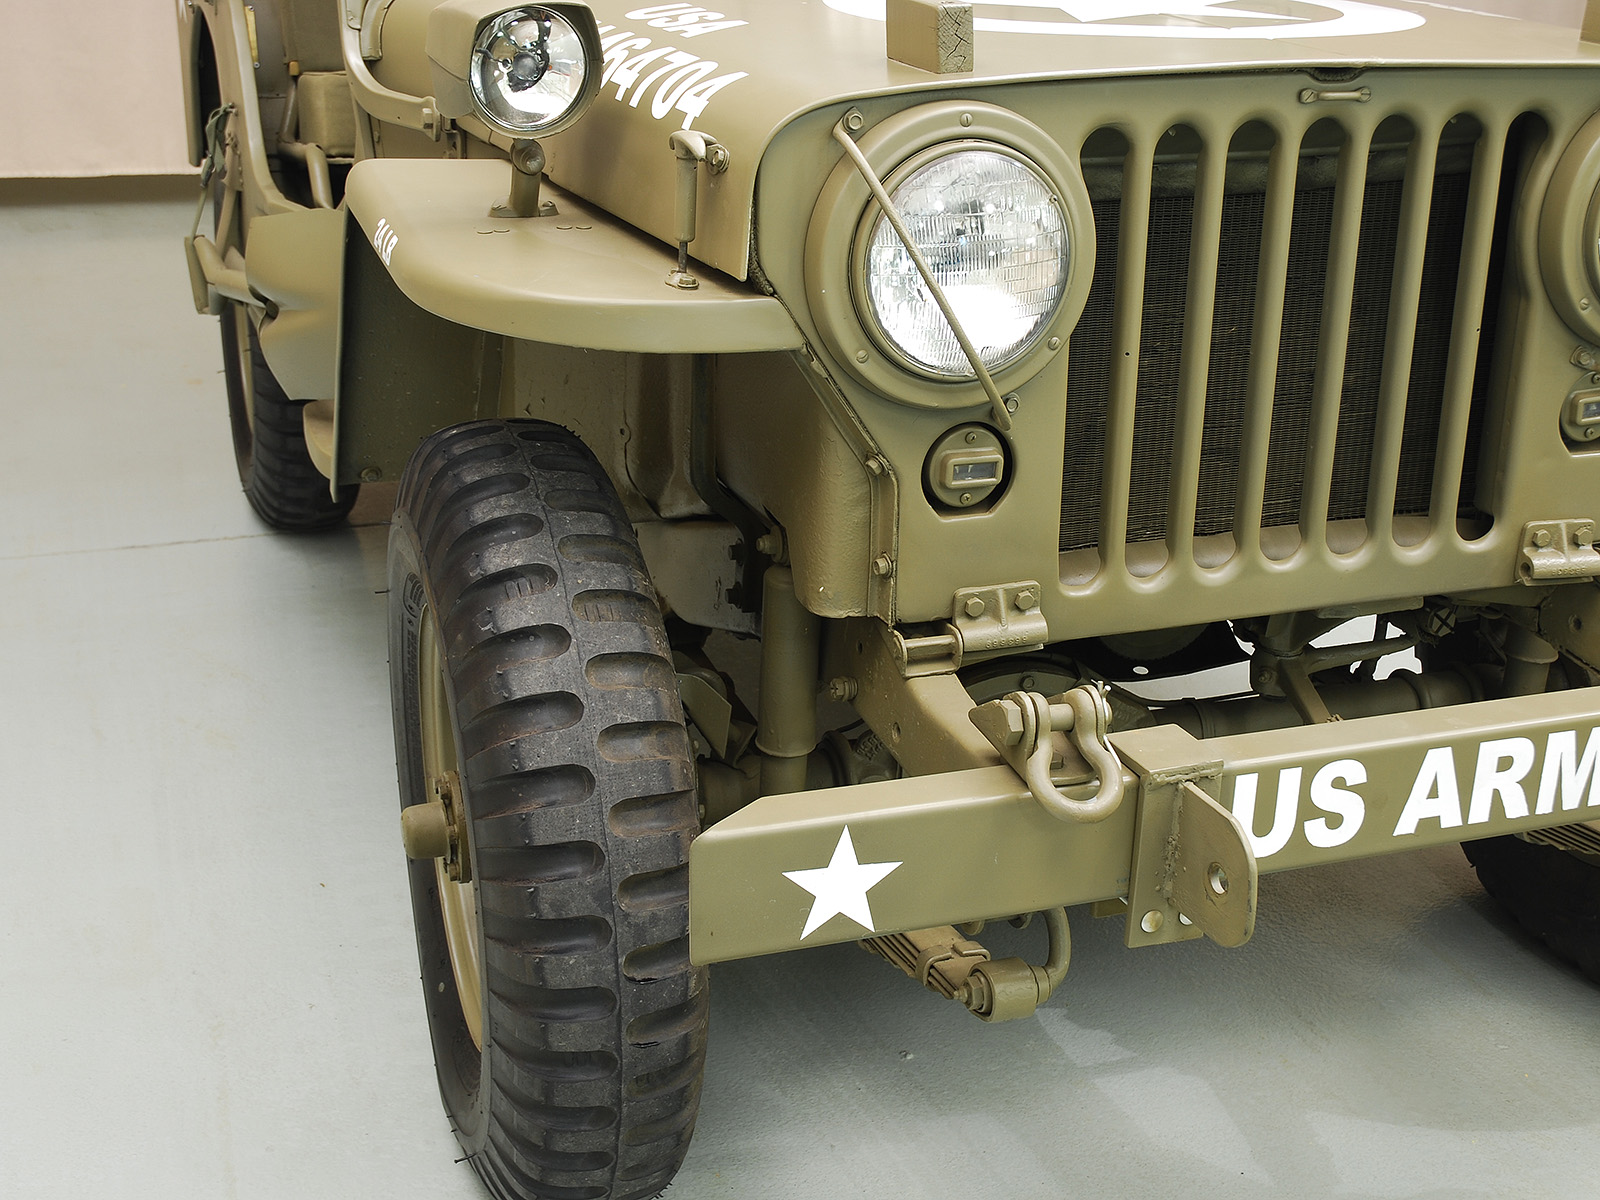 1951 willys-overland m38 1/4 ton